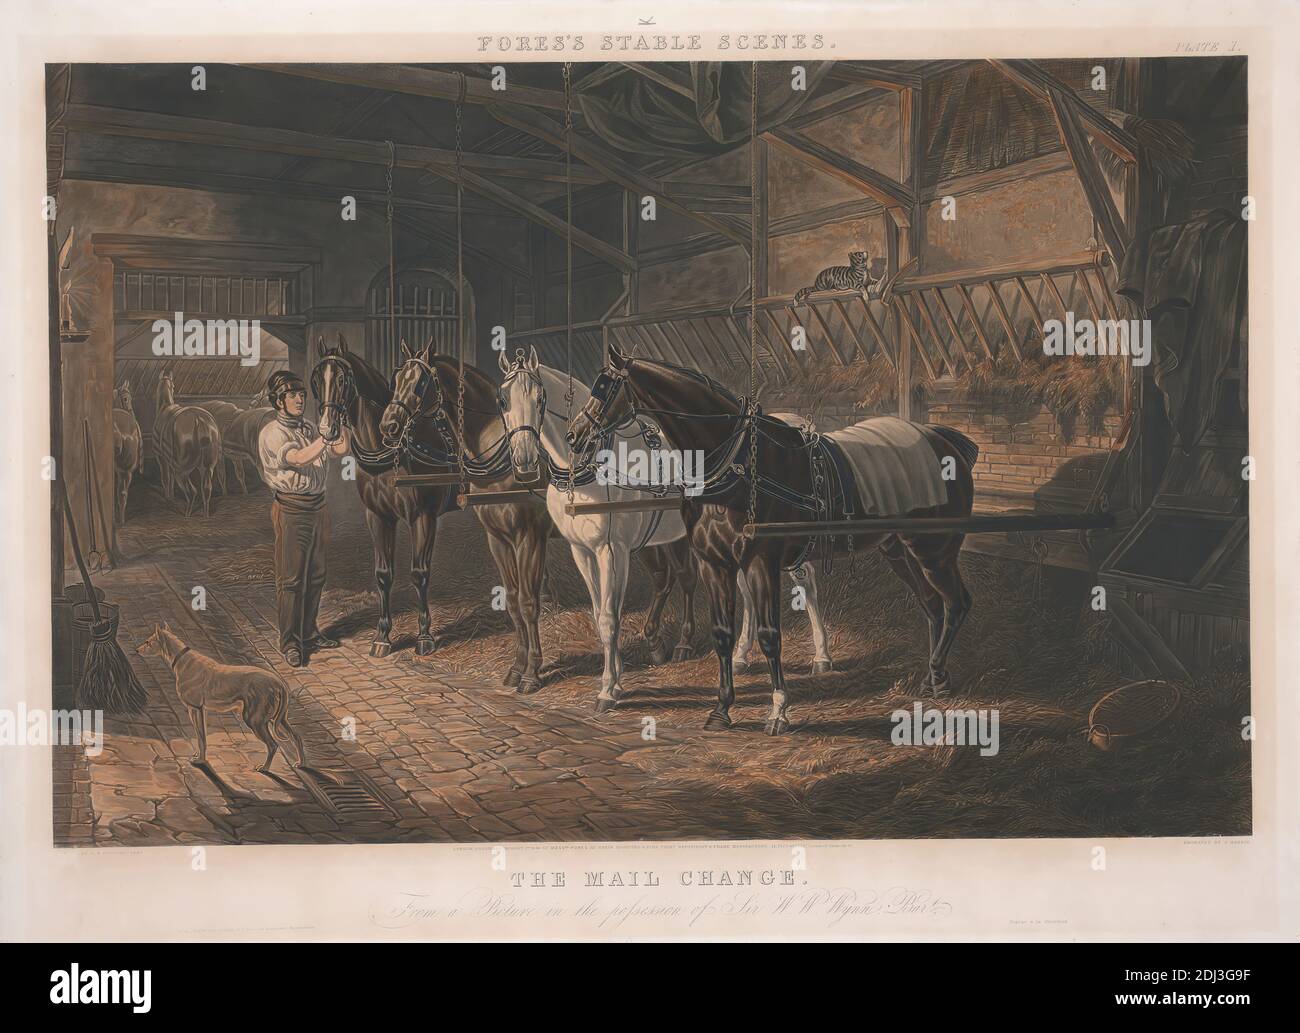 Fore's Stable Scenes: The Mail Change, John Harris, 1811–1865, British, after John Frederick Herring, 1795–1865, British, 1844, Aquatint, hand-colored, Sheet: 17 1/4 x 26 1/2in. (43.8 x 67.3cm Stock Photo